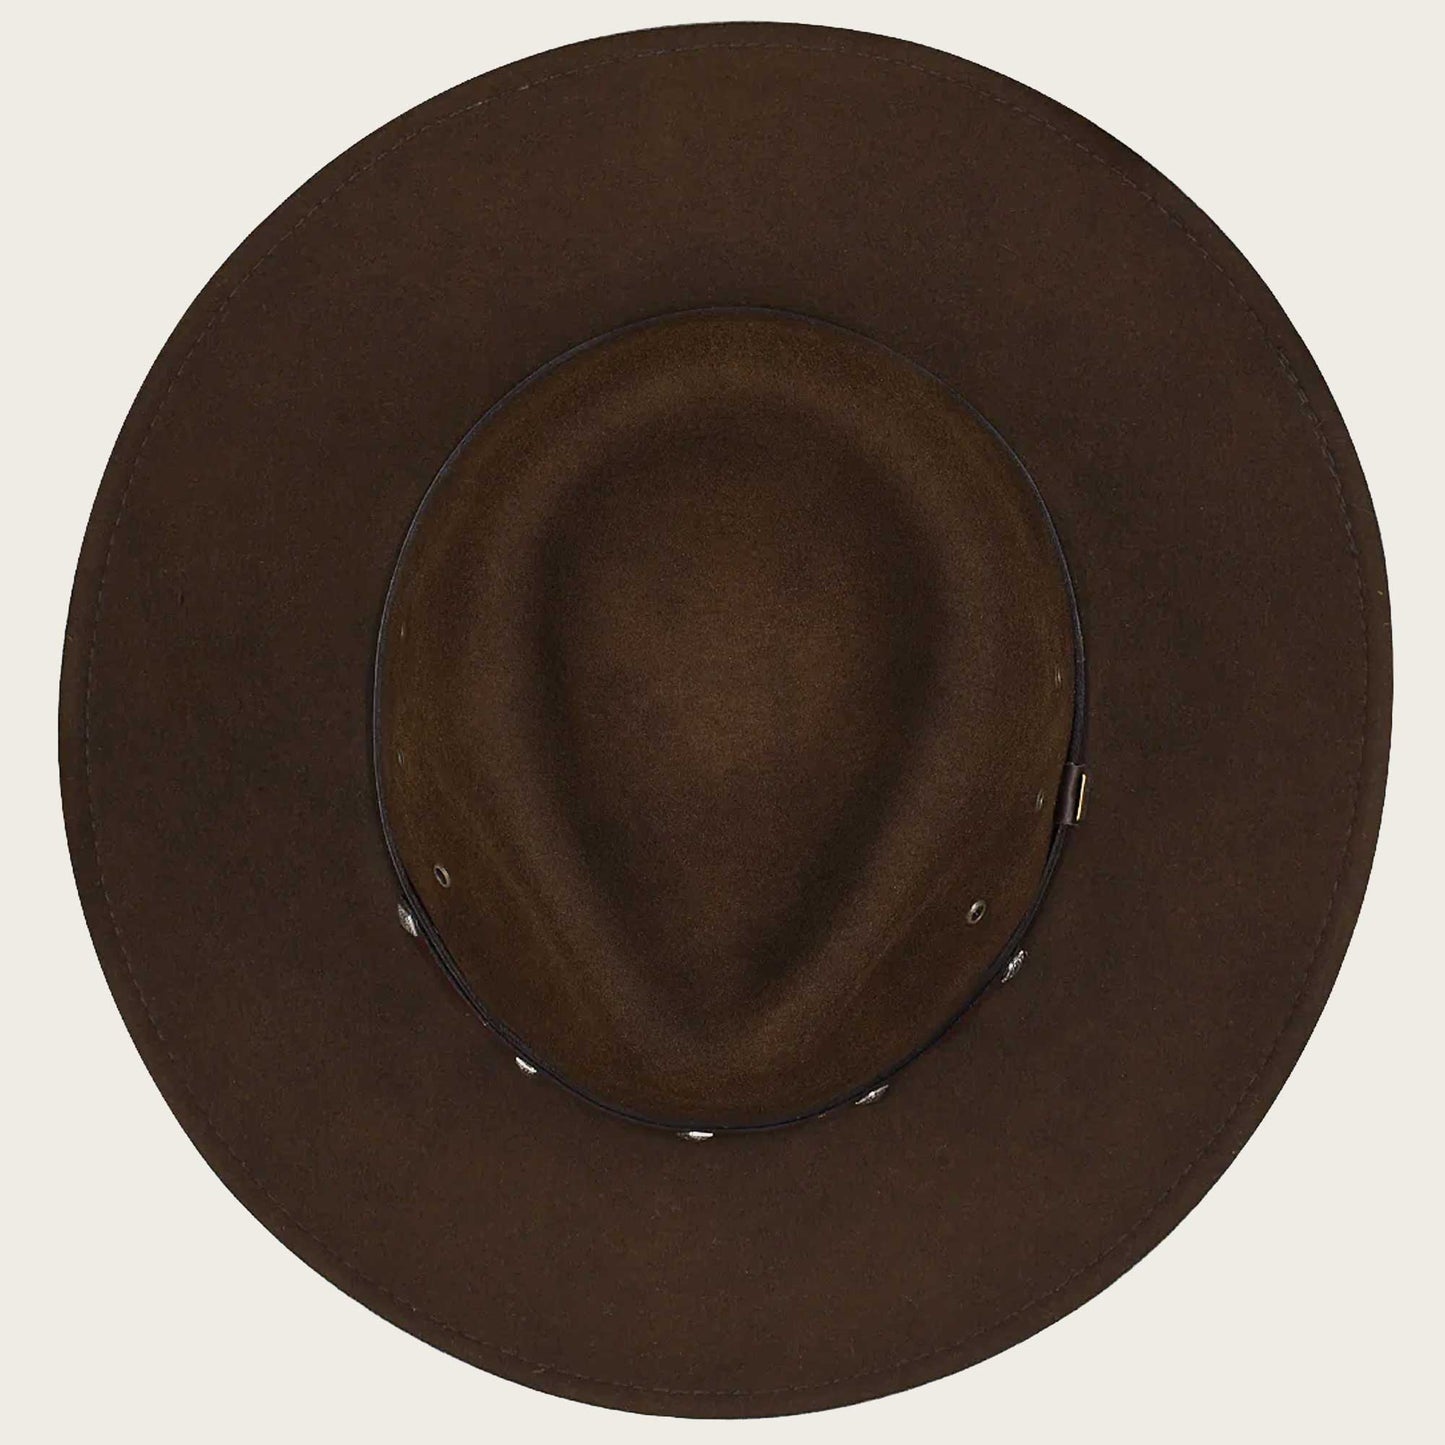 Cuadra brown wool hat with leather belt